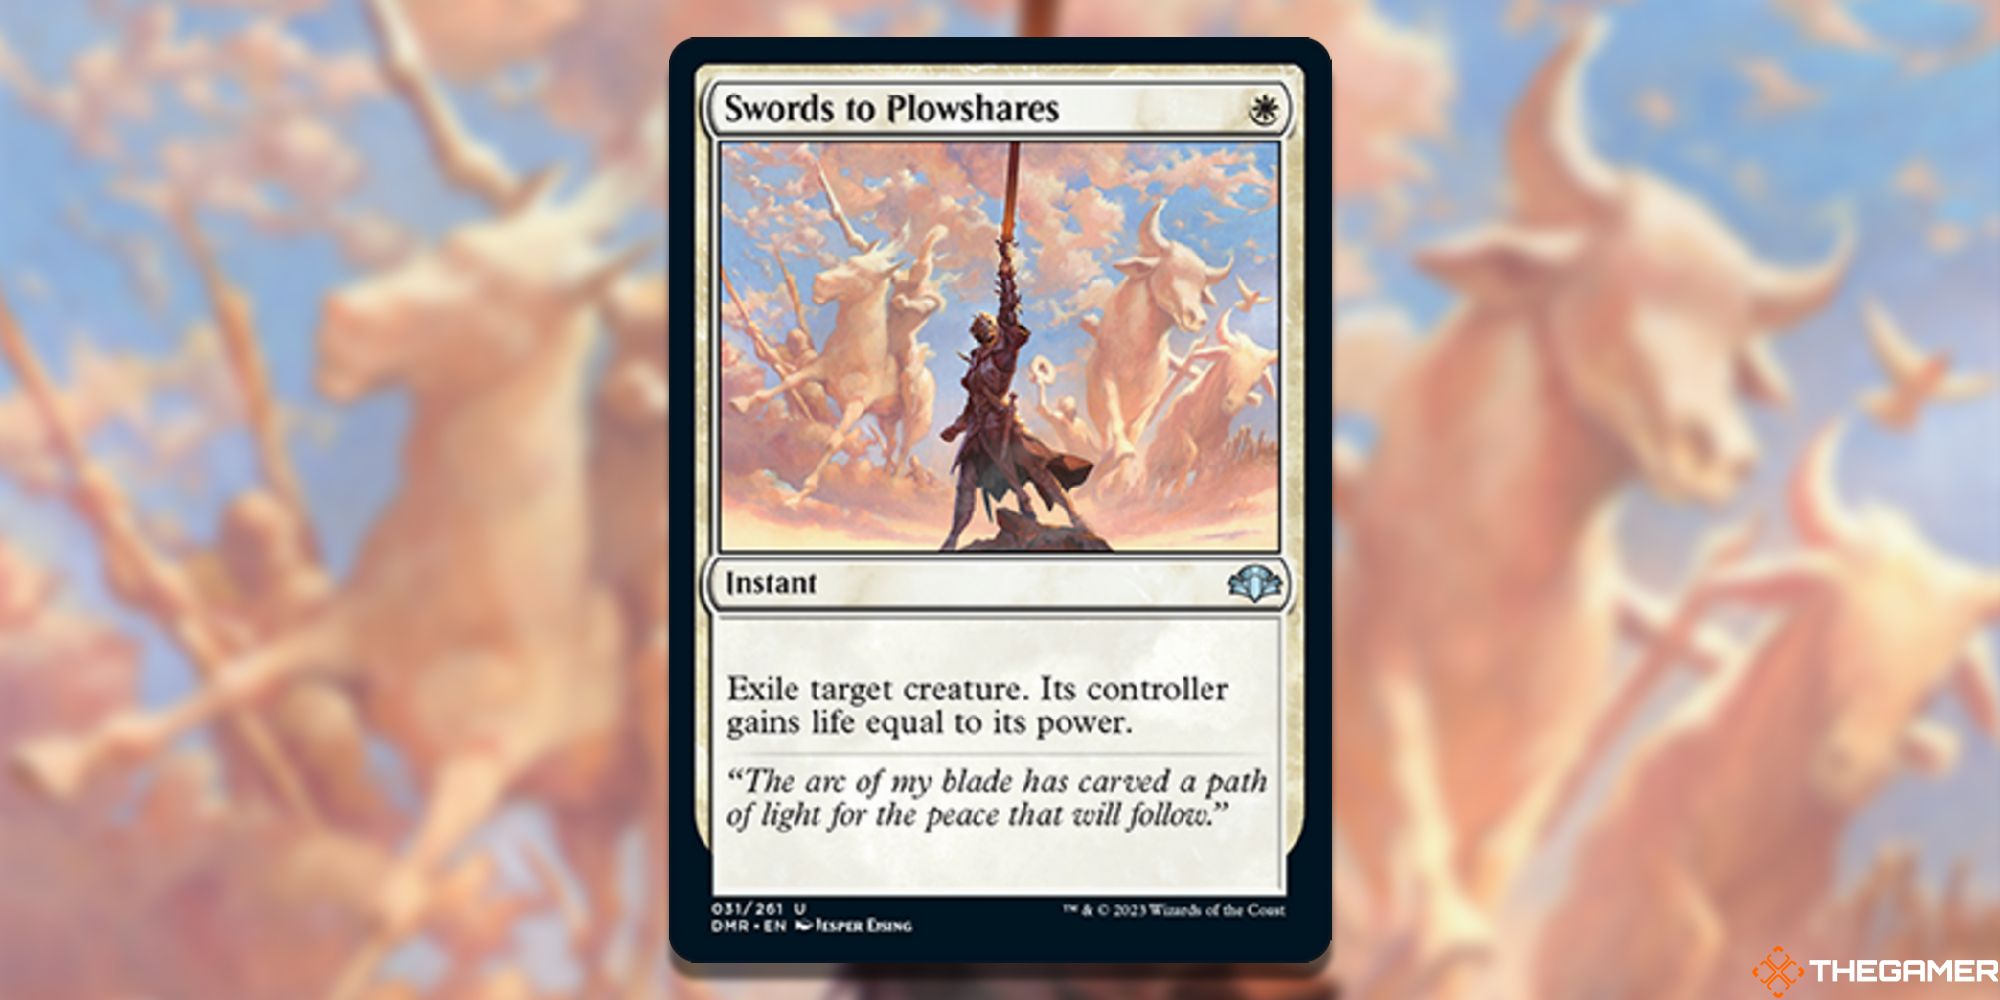 Image of the Swords to Plowshares card in Magic: The Gathering, with art by  Jesper Ejsing